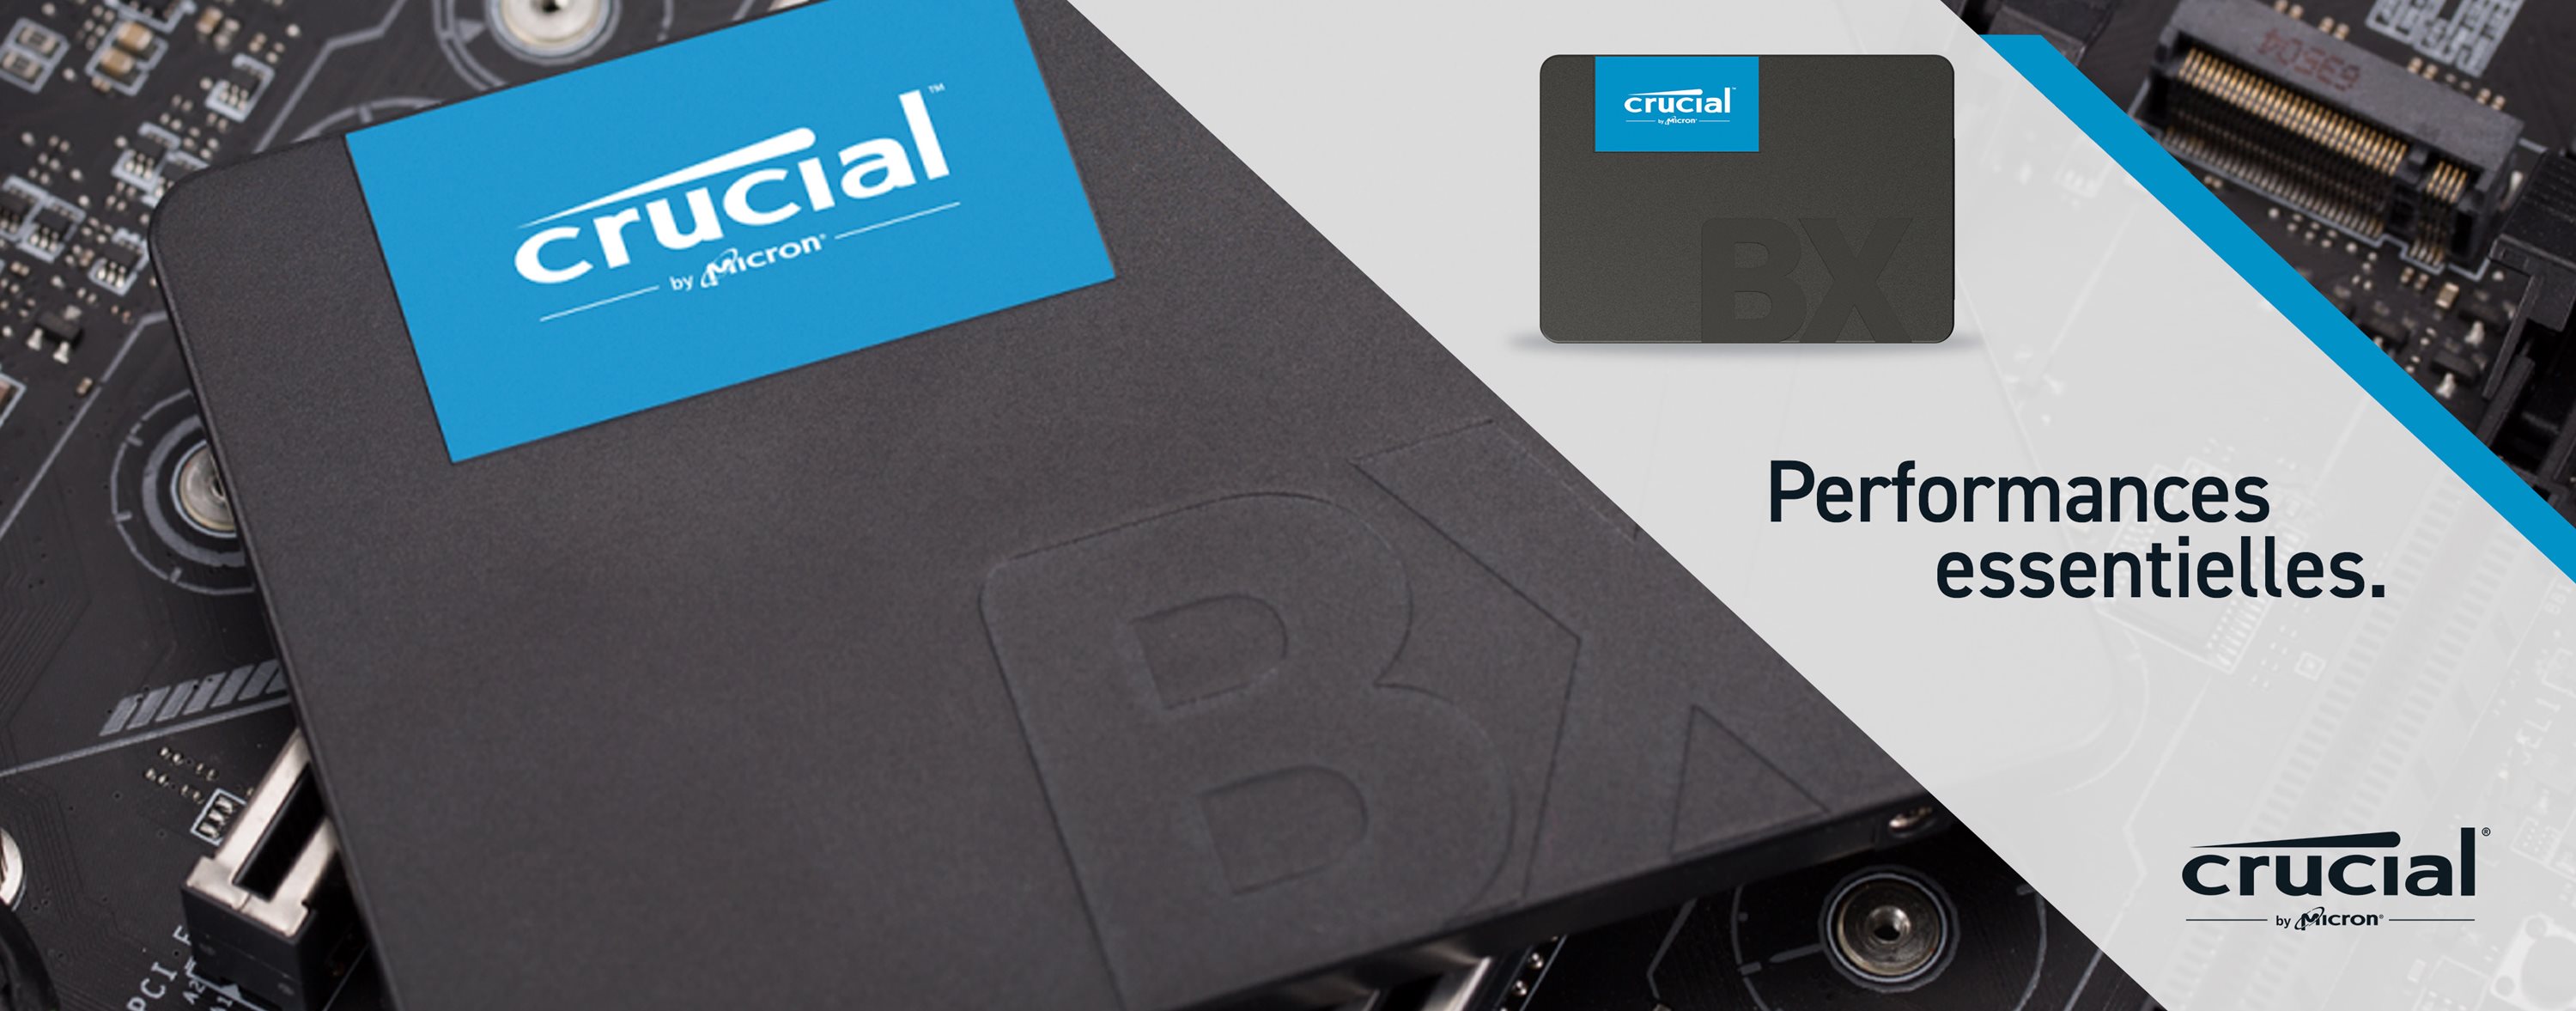 Crucial BX500 - SSD - 2 To - SATA 6Gb/s (CT2000BX500SSD1)